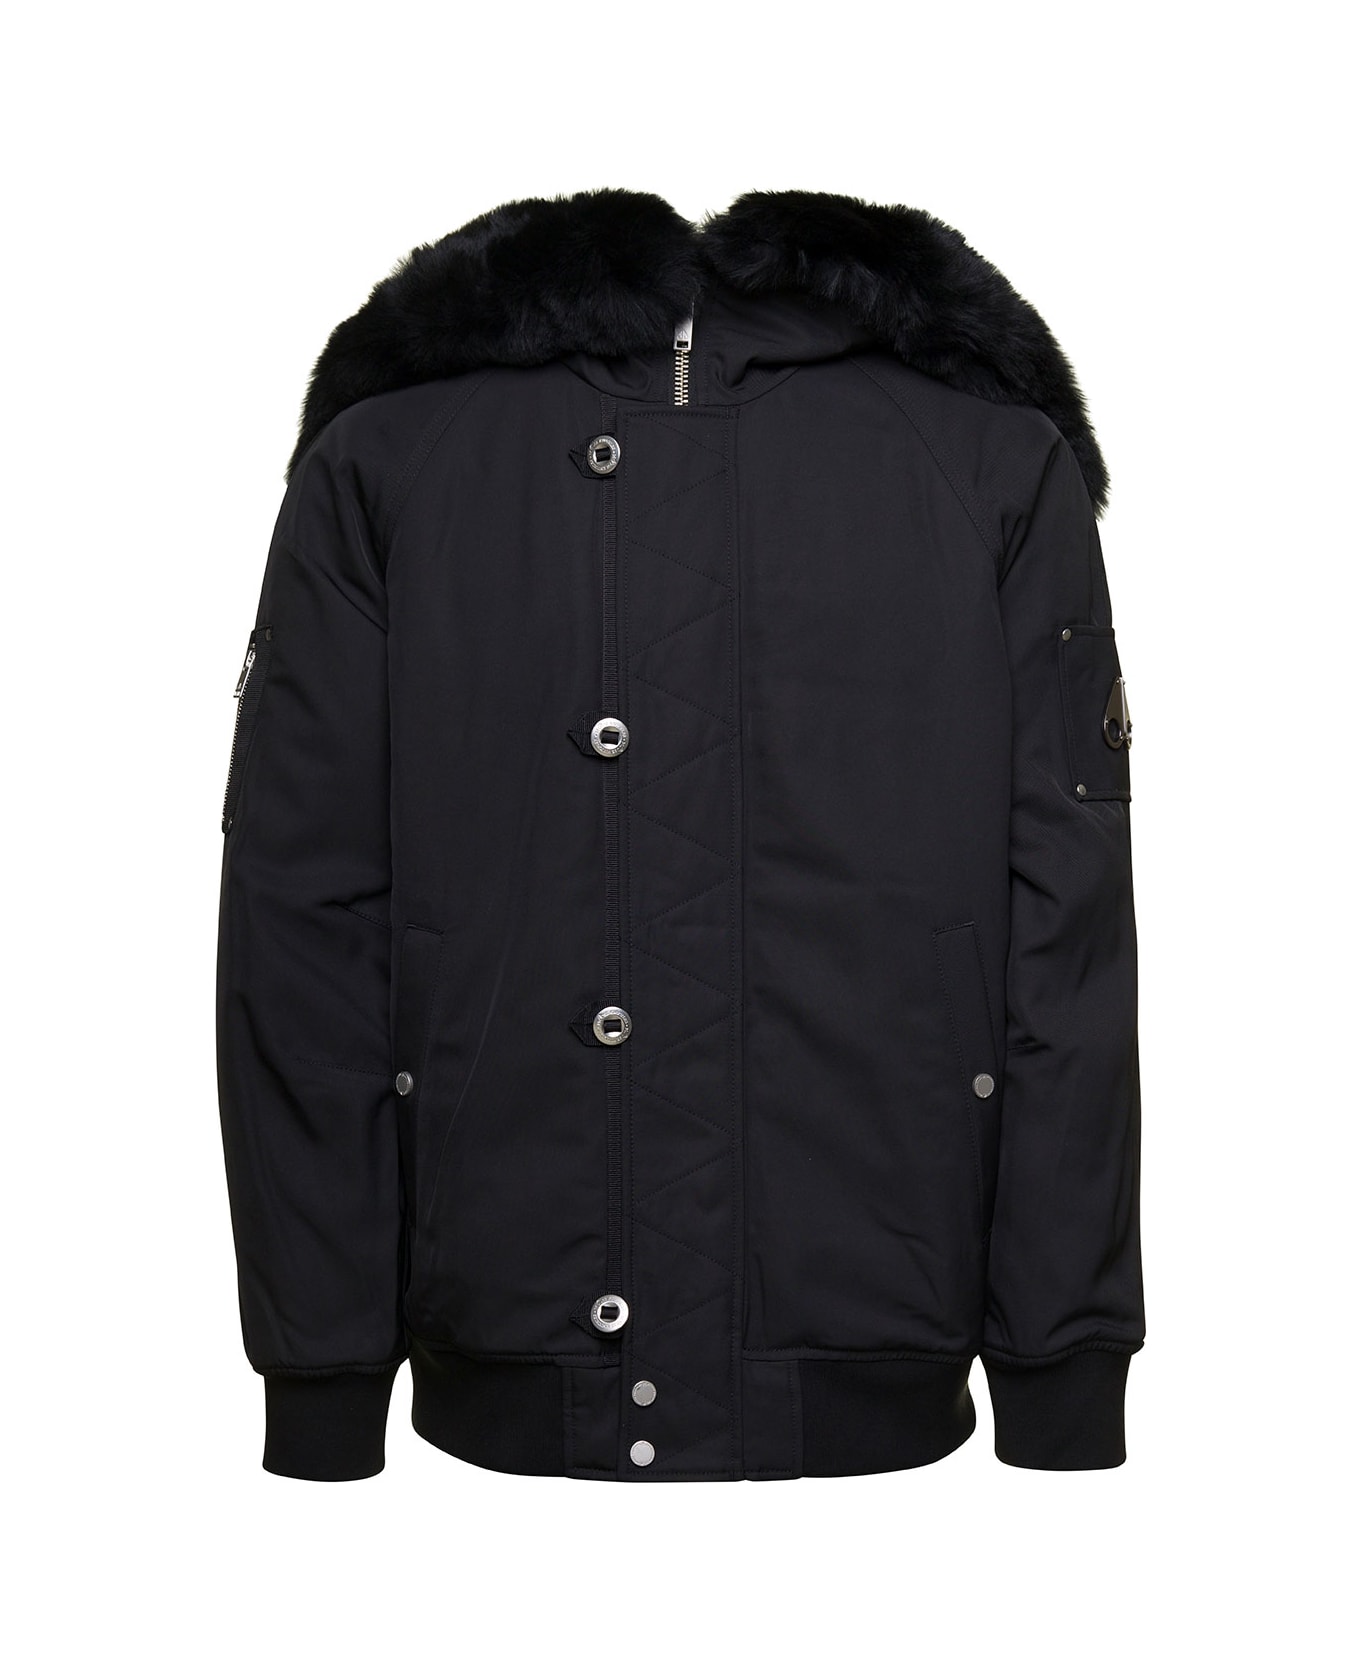 Moose Knuckles Black Zipped All The Way Jacket With Logo Patch In Nylon Man - Black